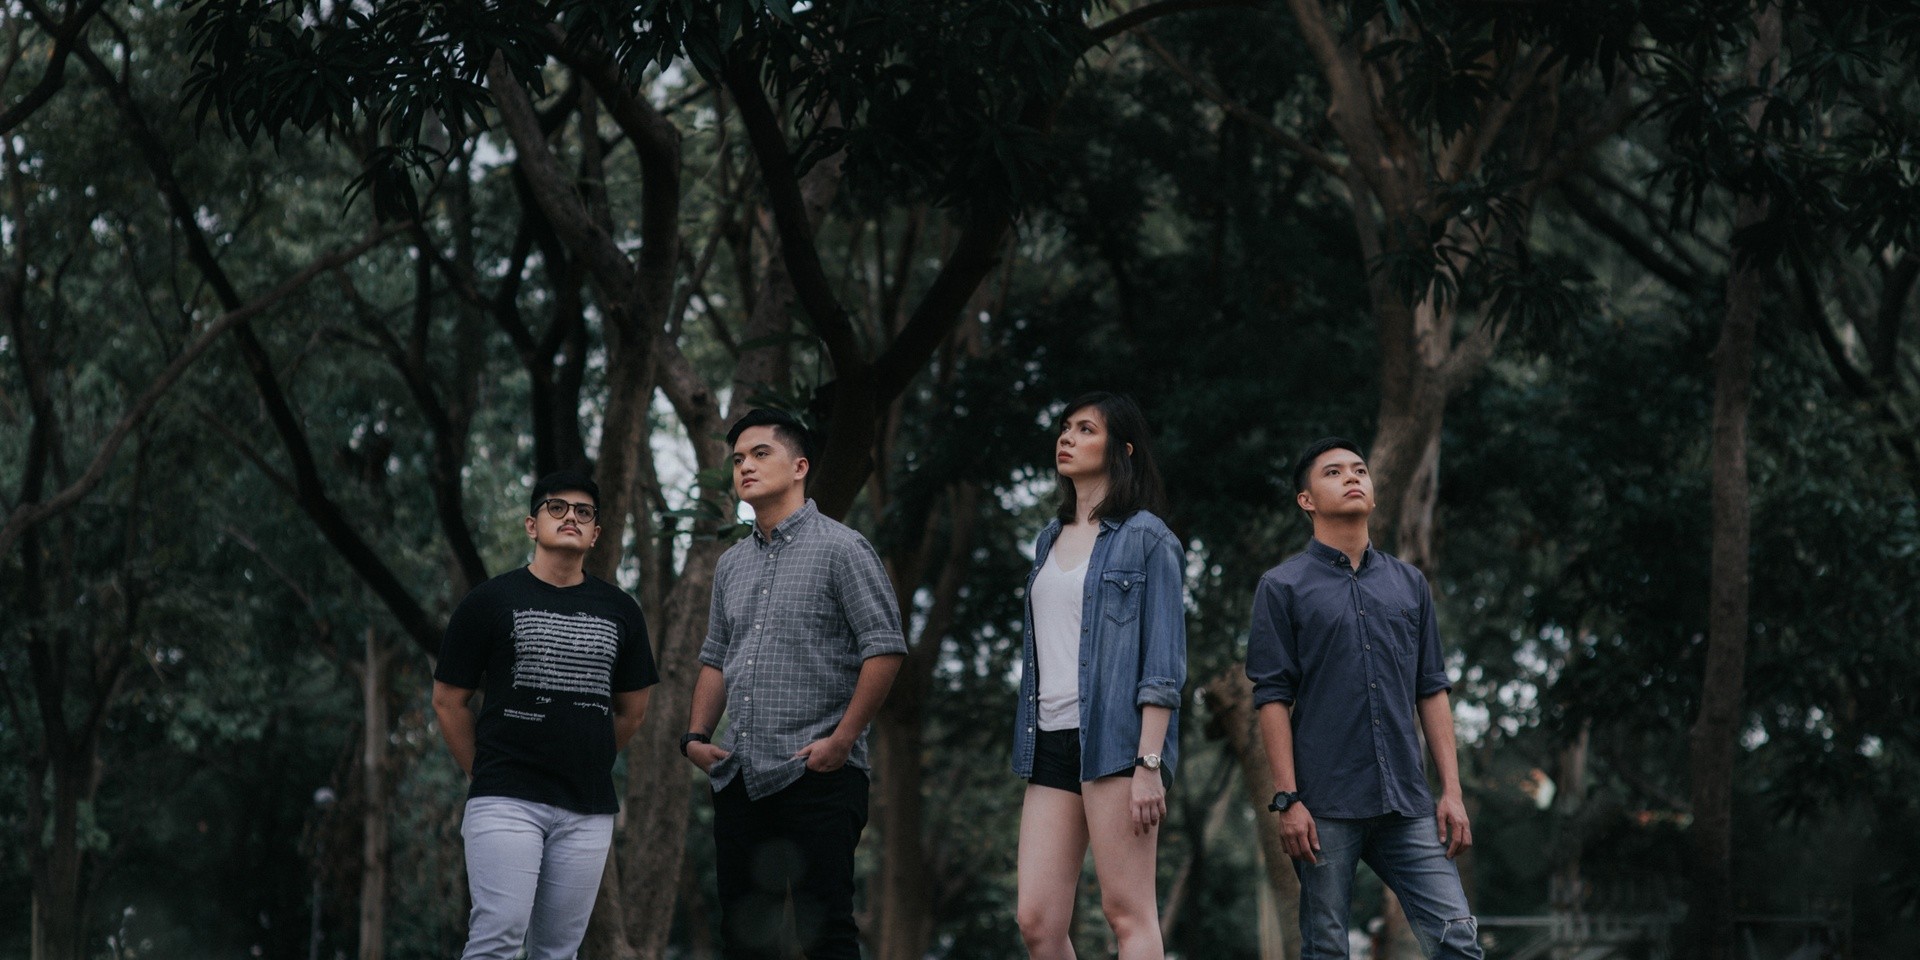 Fools and Foes unveil new single and music video, 'Sheriff' – watch